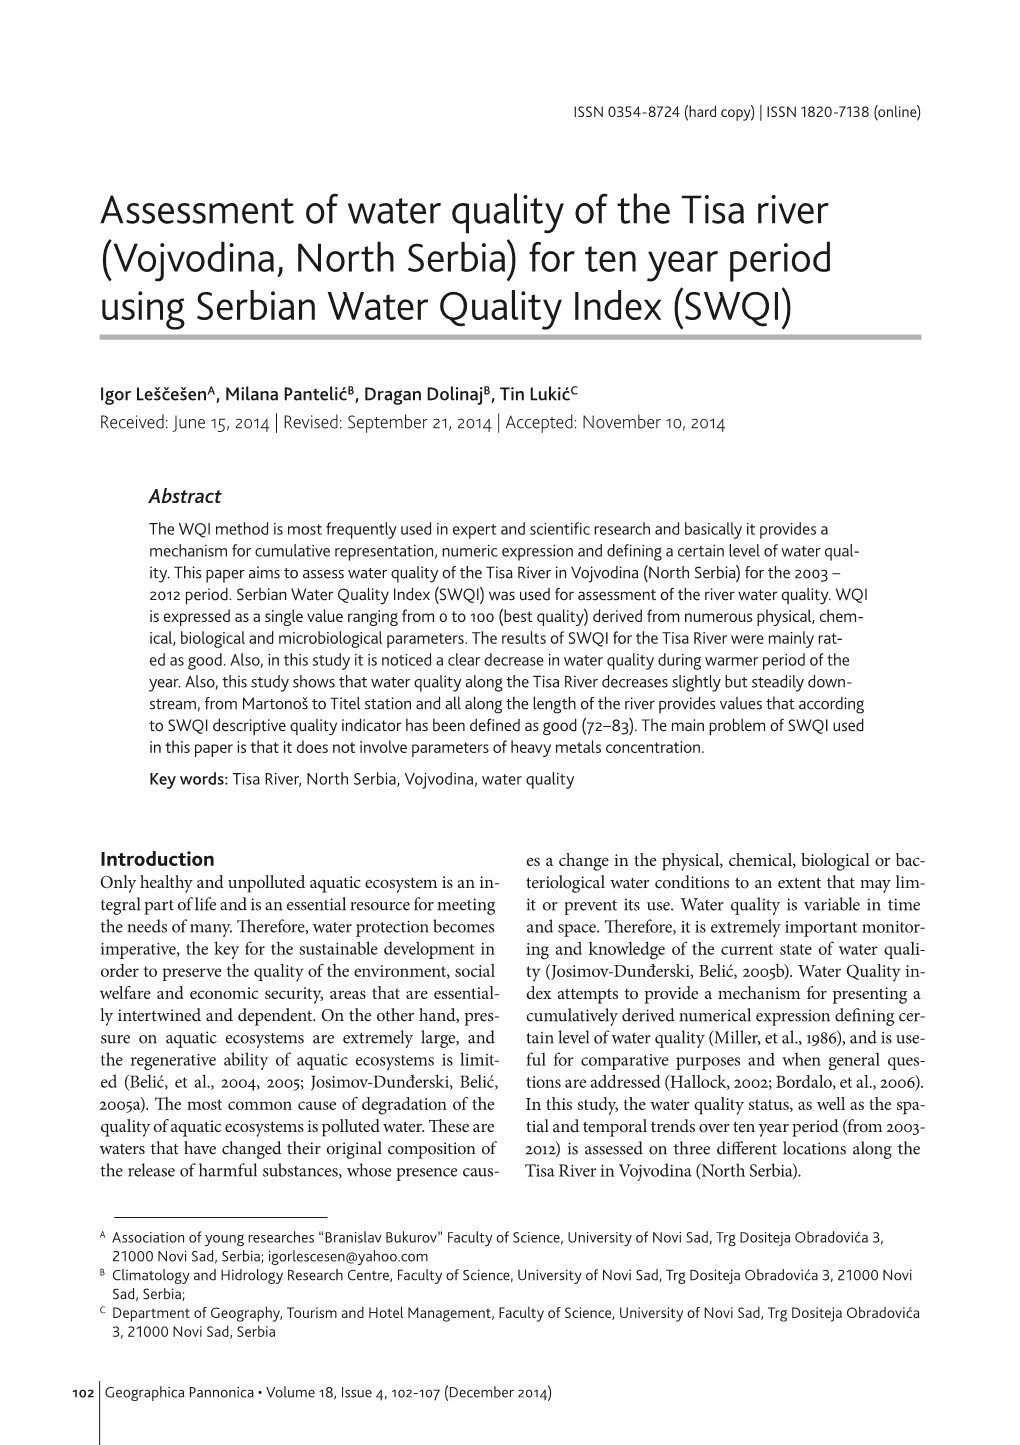 Assessment of Water Quality of the Tisa River (Vojvodina, North Serbia) for Ten Year Period Using Serbian Water Quality Index (SWQI)